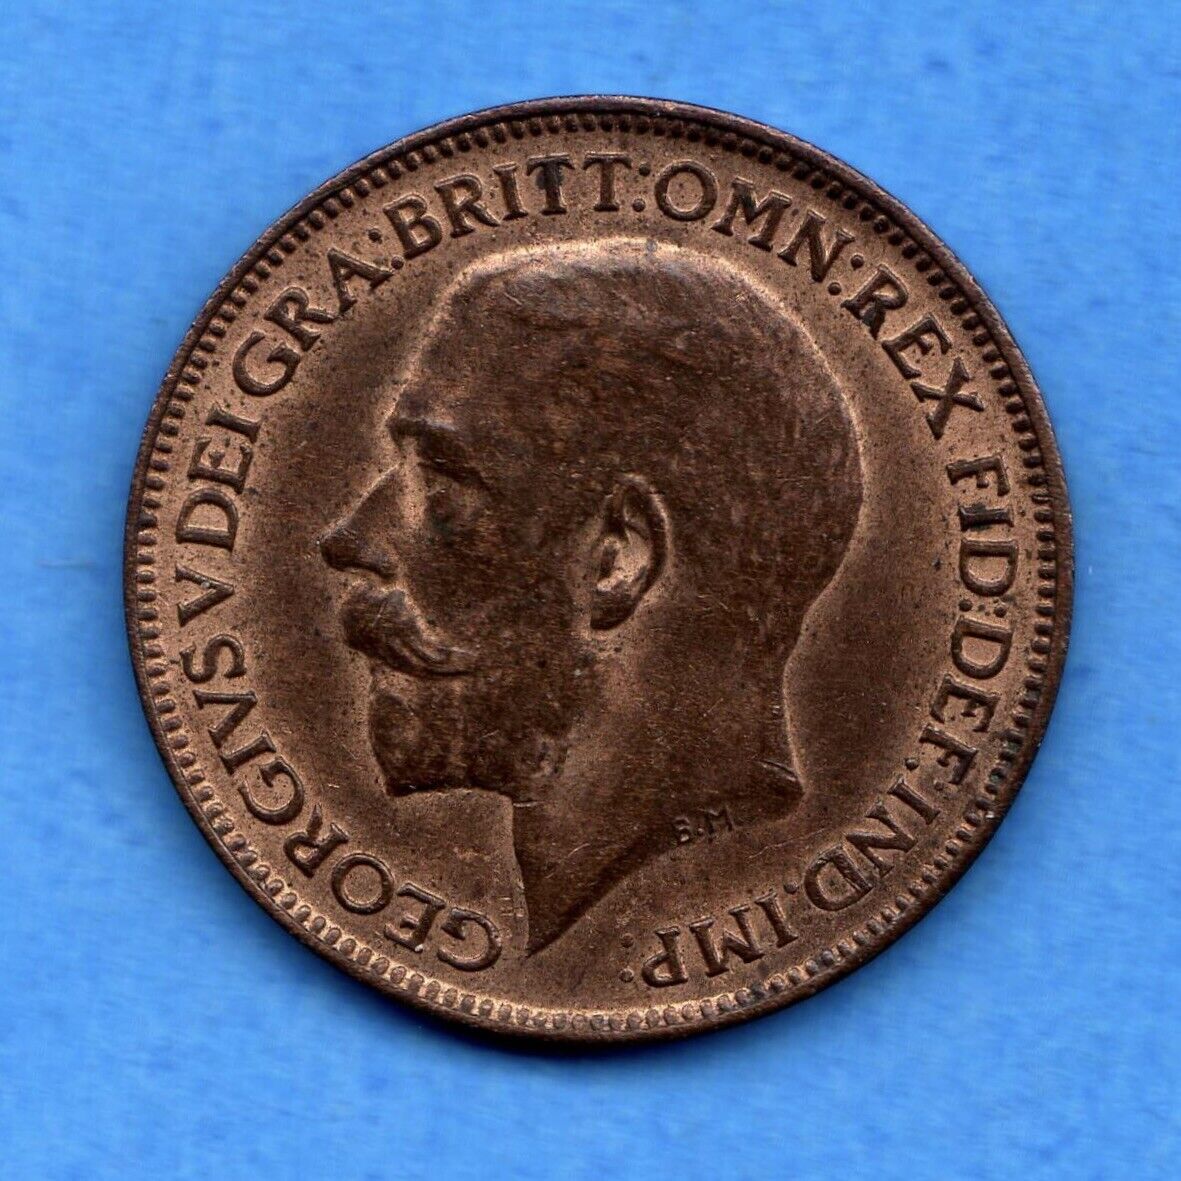 Farthing 1923 Great Britain Coin KM #808.2 - Lustrous